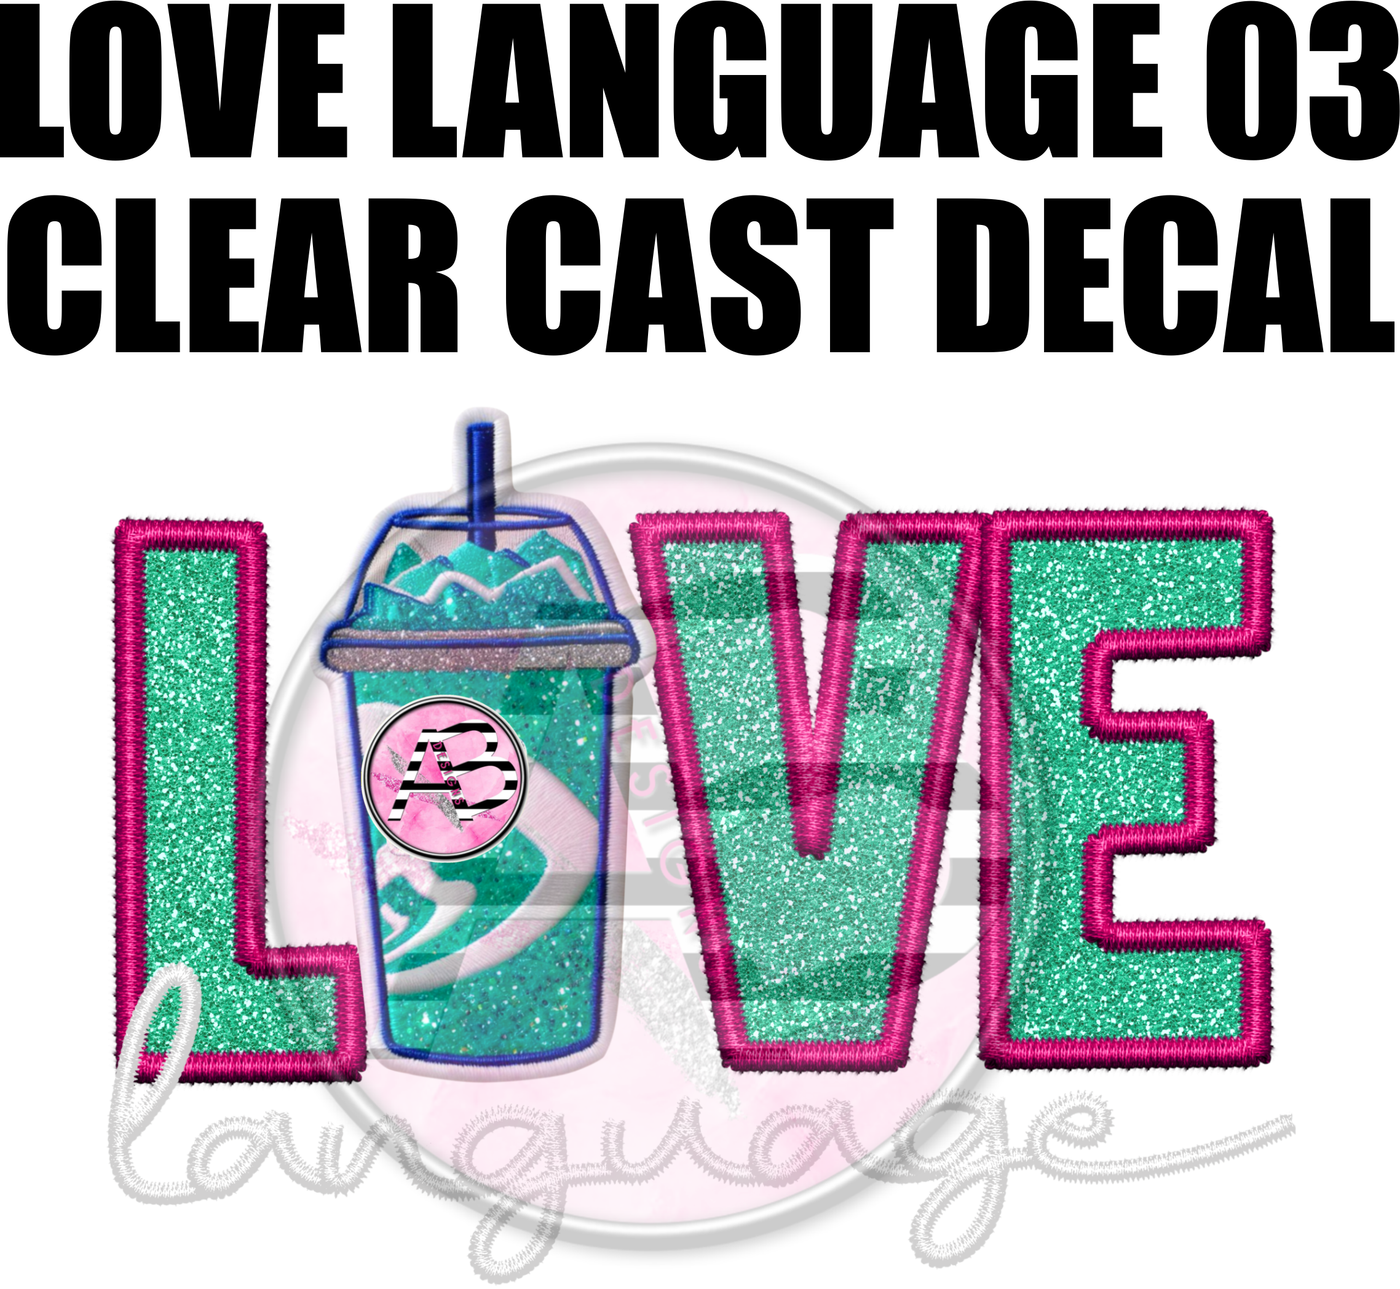 Love Language 03 - Clear Cast Decal-413